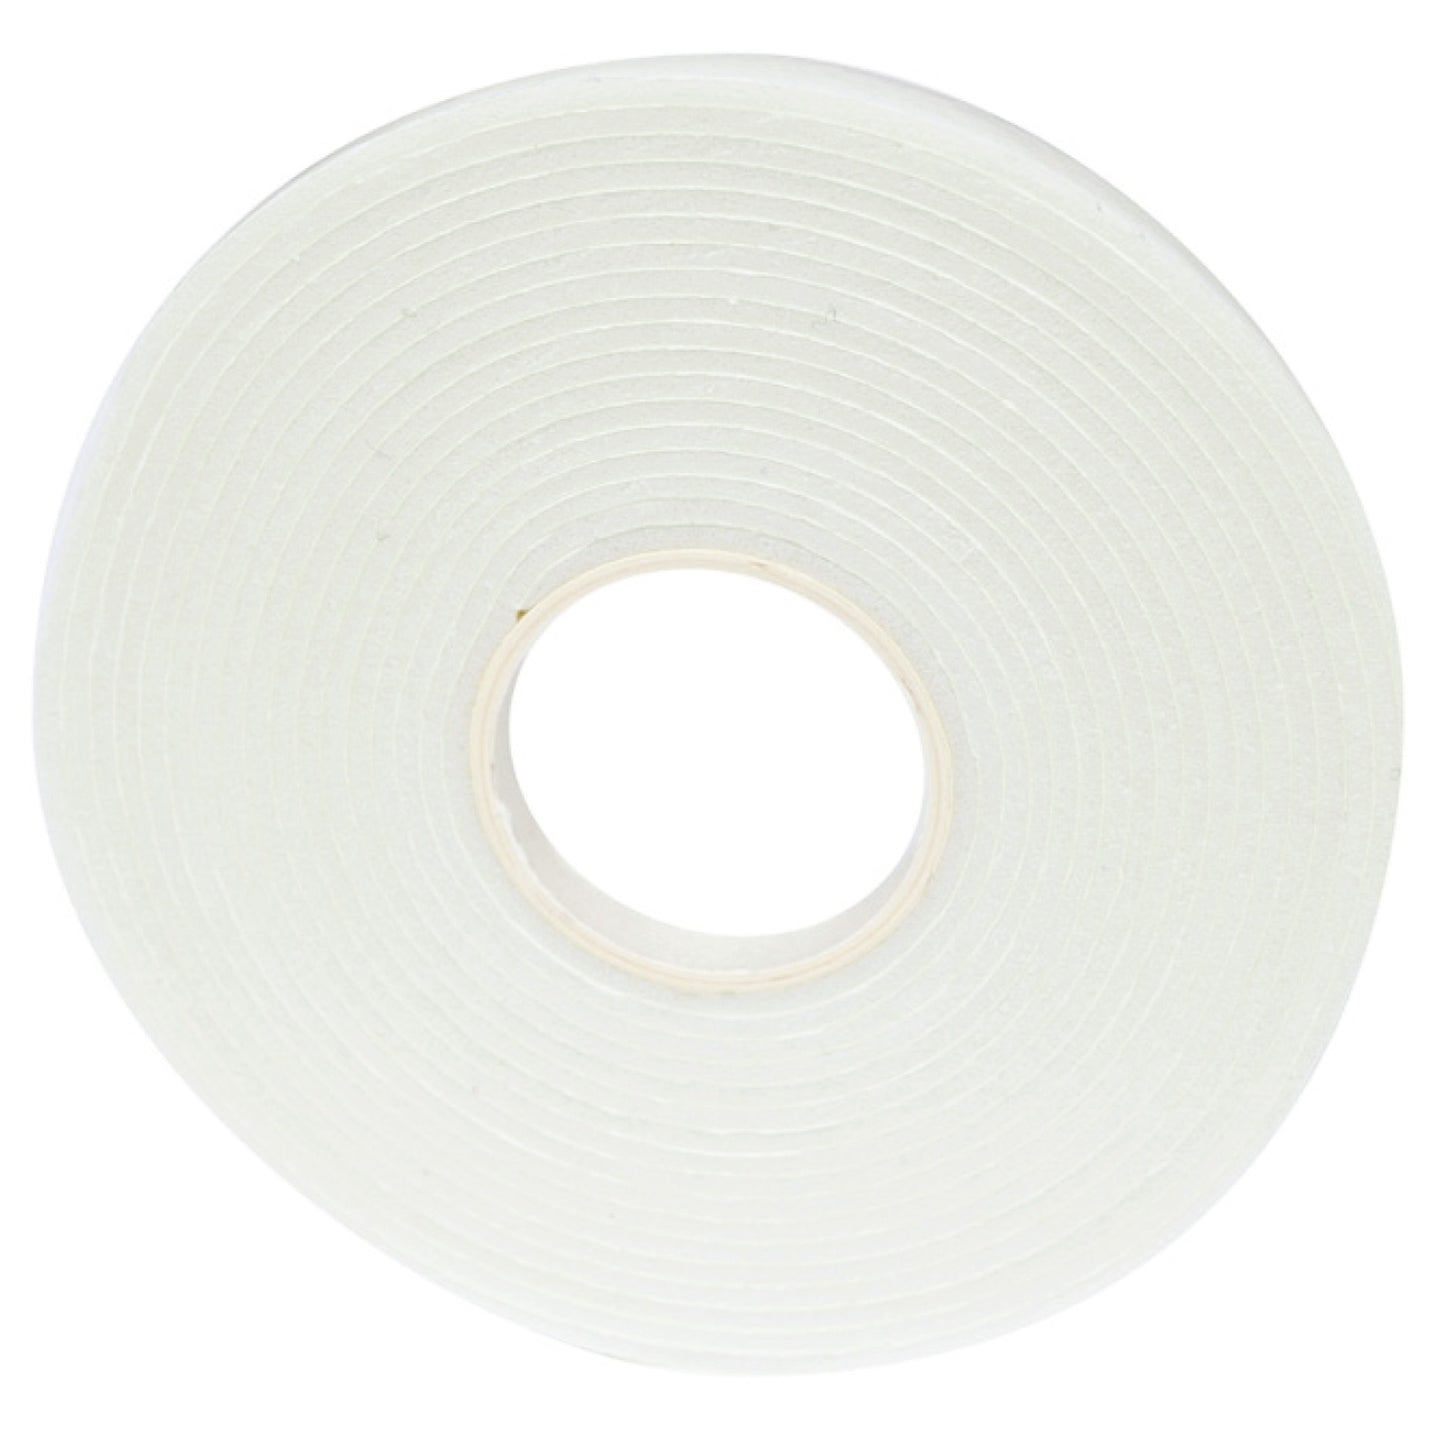 Sticky Thumb Double-Sided Foam Tape 3.94 Yards-White, 0.25"X2mm